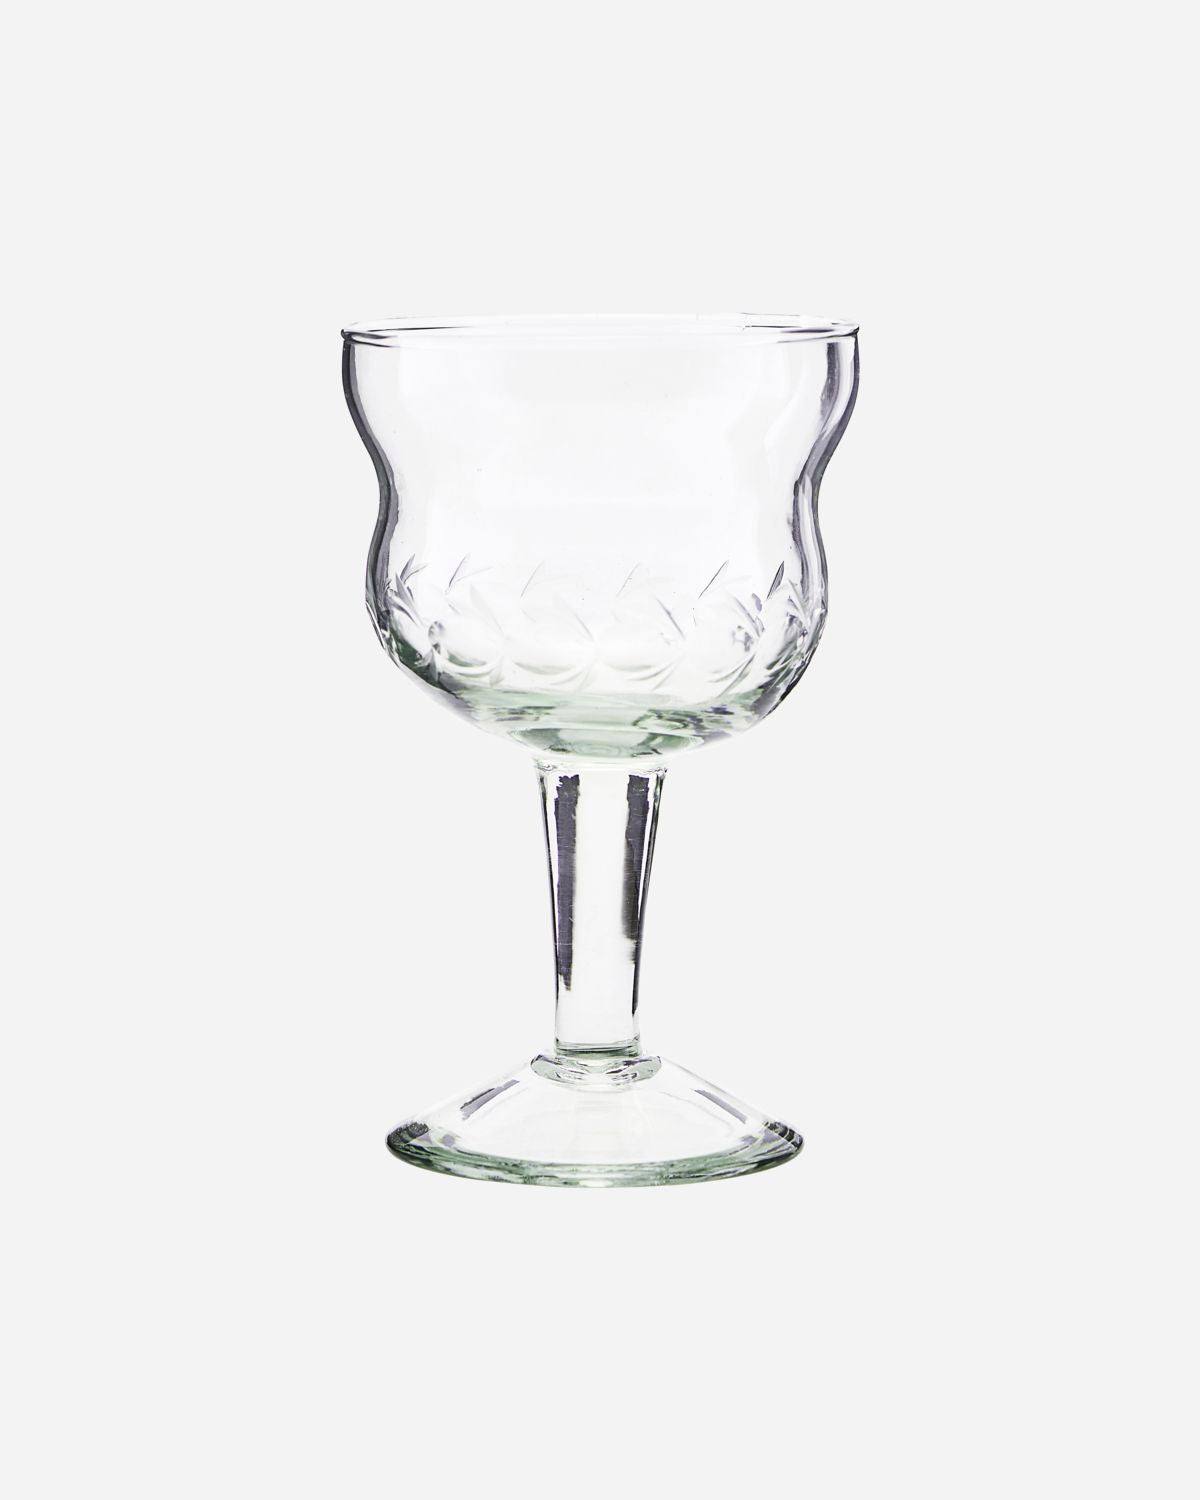 Wine Glass, Vintage House Doctor